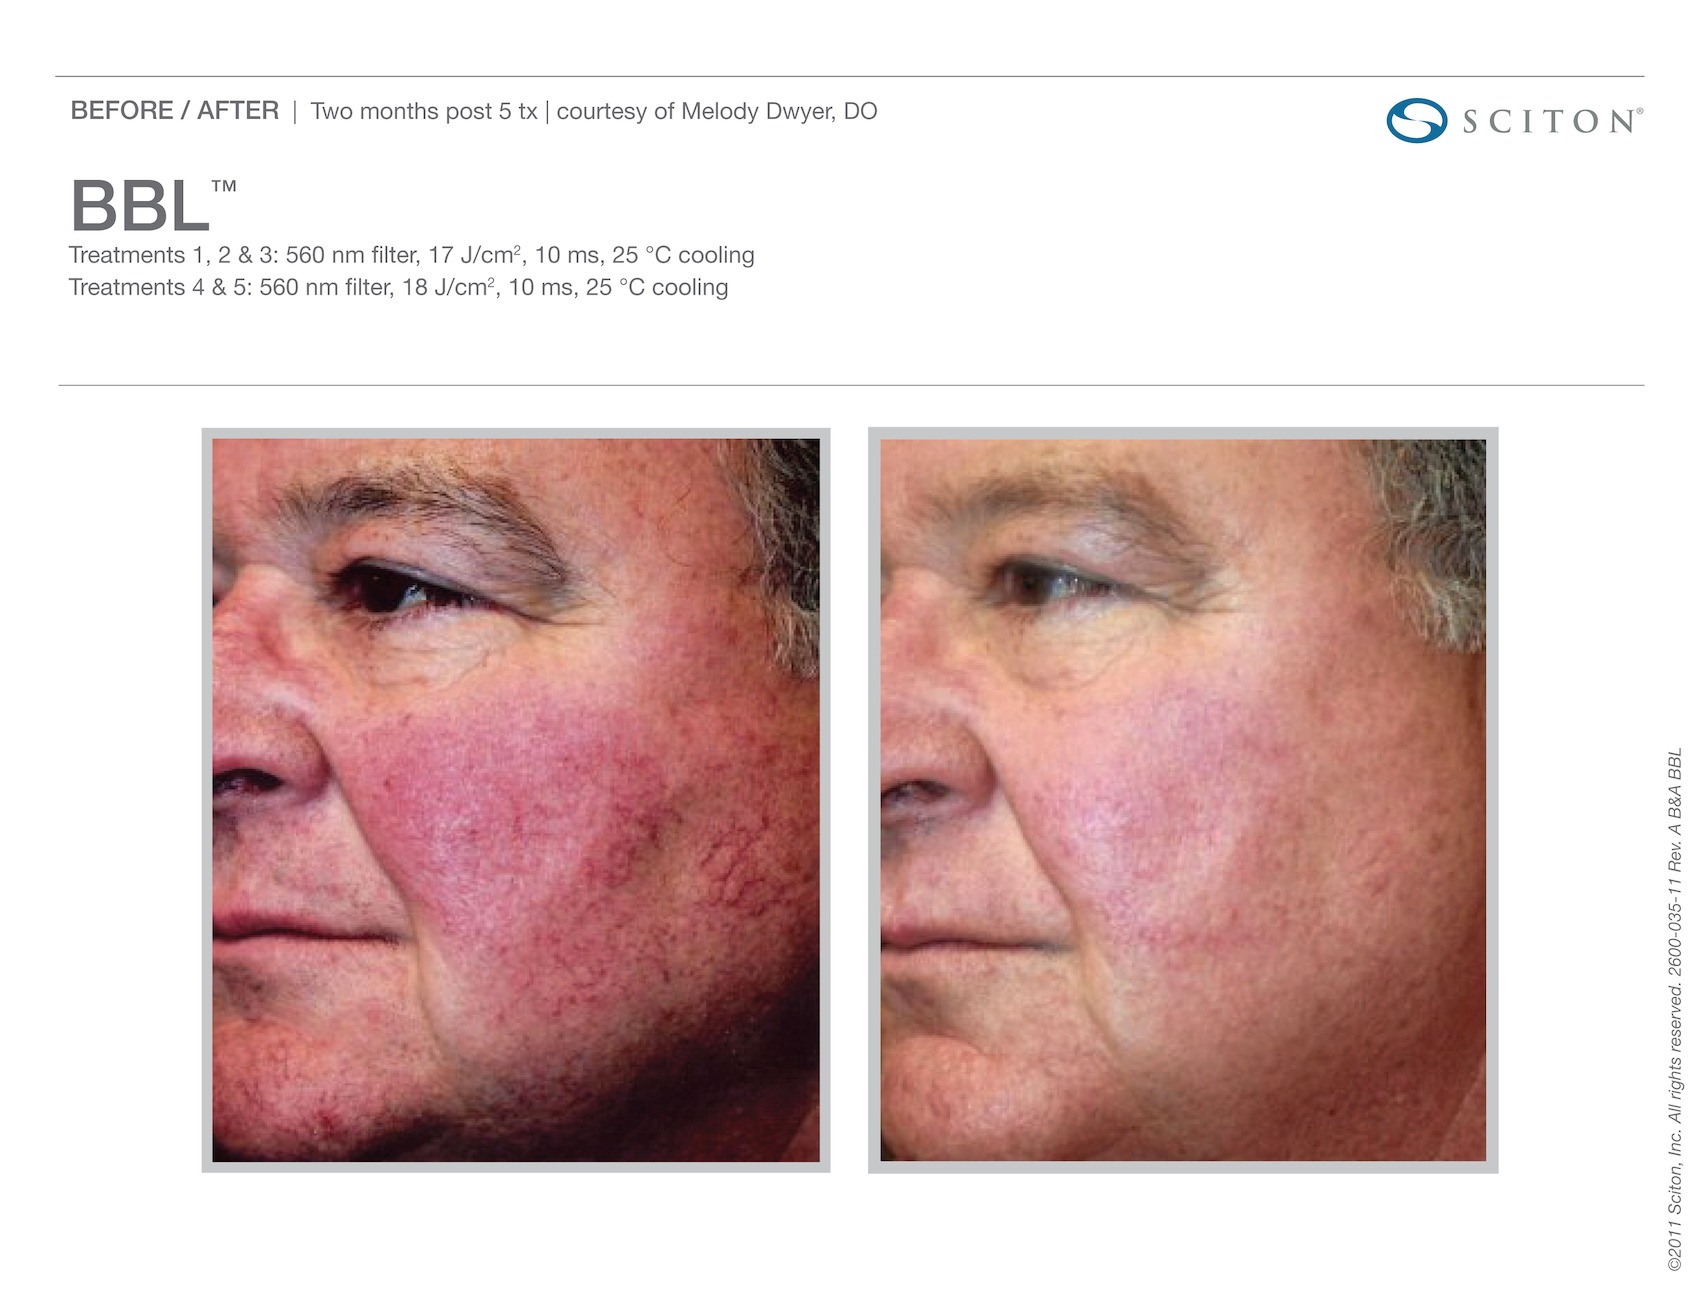 Side by side before and after images of close up of man's left side of face. Left image shows before, right image shows after BBL Hero treatment - redness in skin significantly decreased. Before/After - two months post 5 treatments - courtesy of Melody Dwyer, DO. BBL TM. Treatments 1, 2, and 3: 560 nm filter, 17 J/centimeters squared, 10 ms, 25 degrees Celsius cooling Treatments four and five: 560 nm filter, 18 J/centimeters squared, 10 ms, 25 degrees Celsius cooling. Copyright 2011 Sciton, Inc. All rights reserved. 2600-035-11 Rev. A B and A BBL.